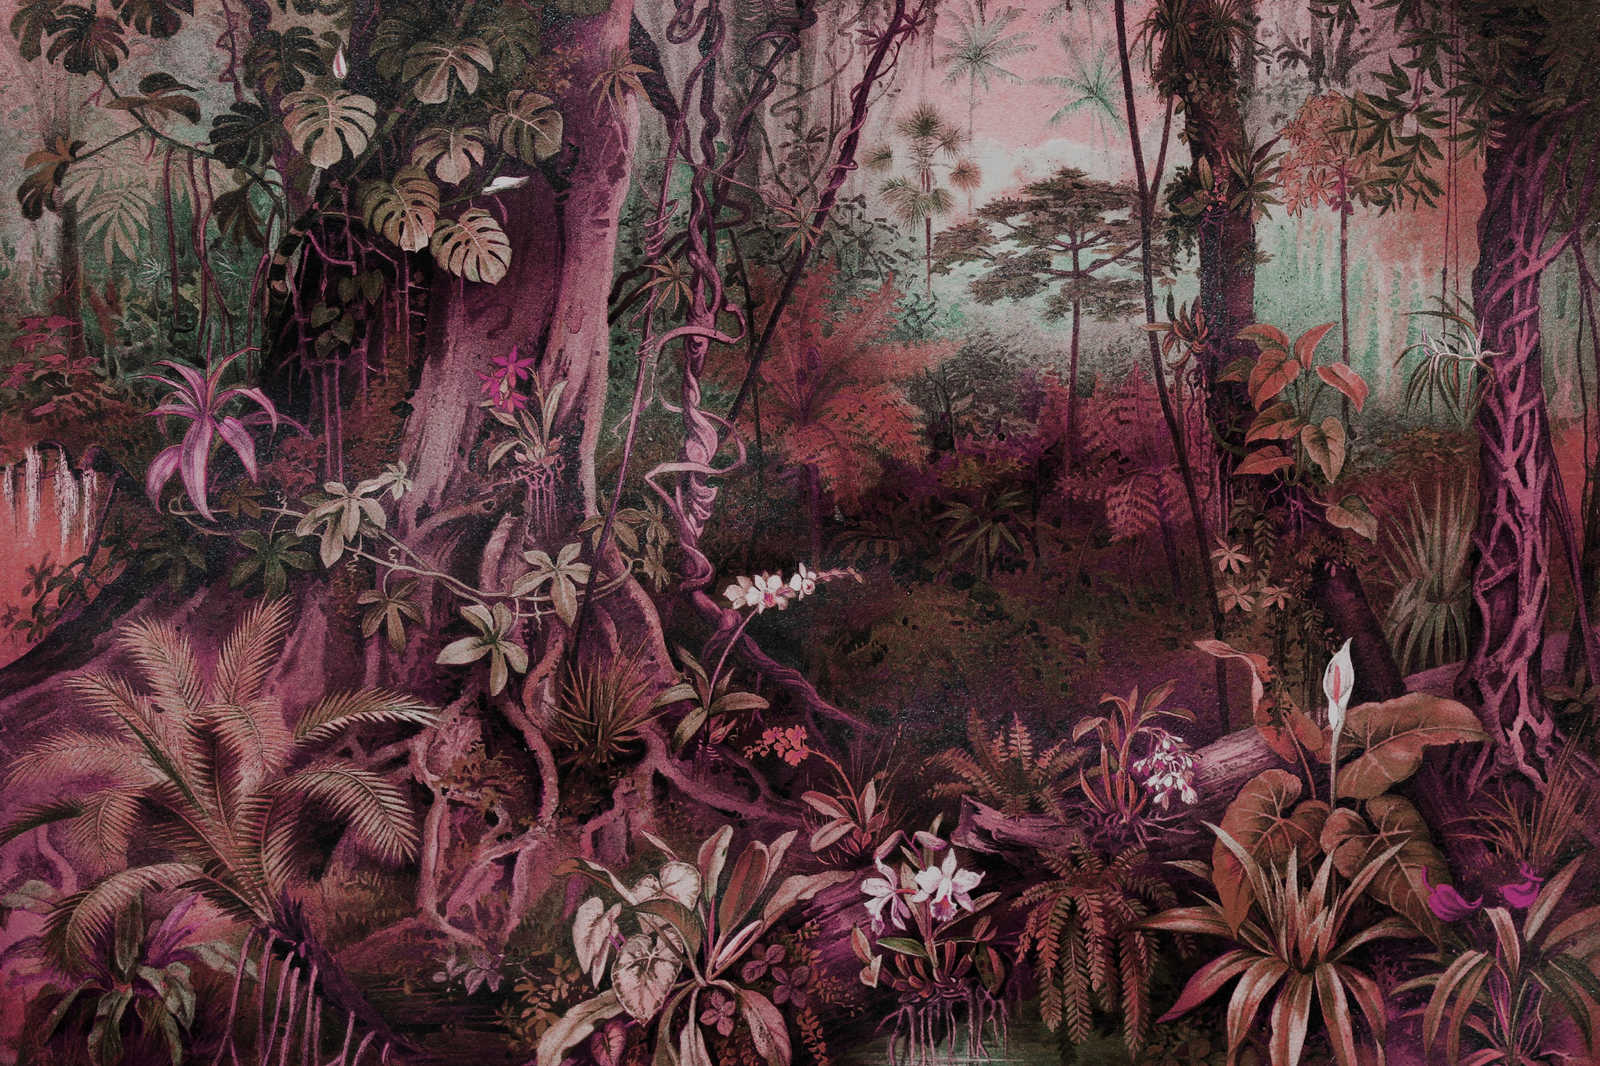             Jungle canvas picture in drawing style | purple, green - 0.90 m x 0.60 m
        